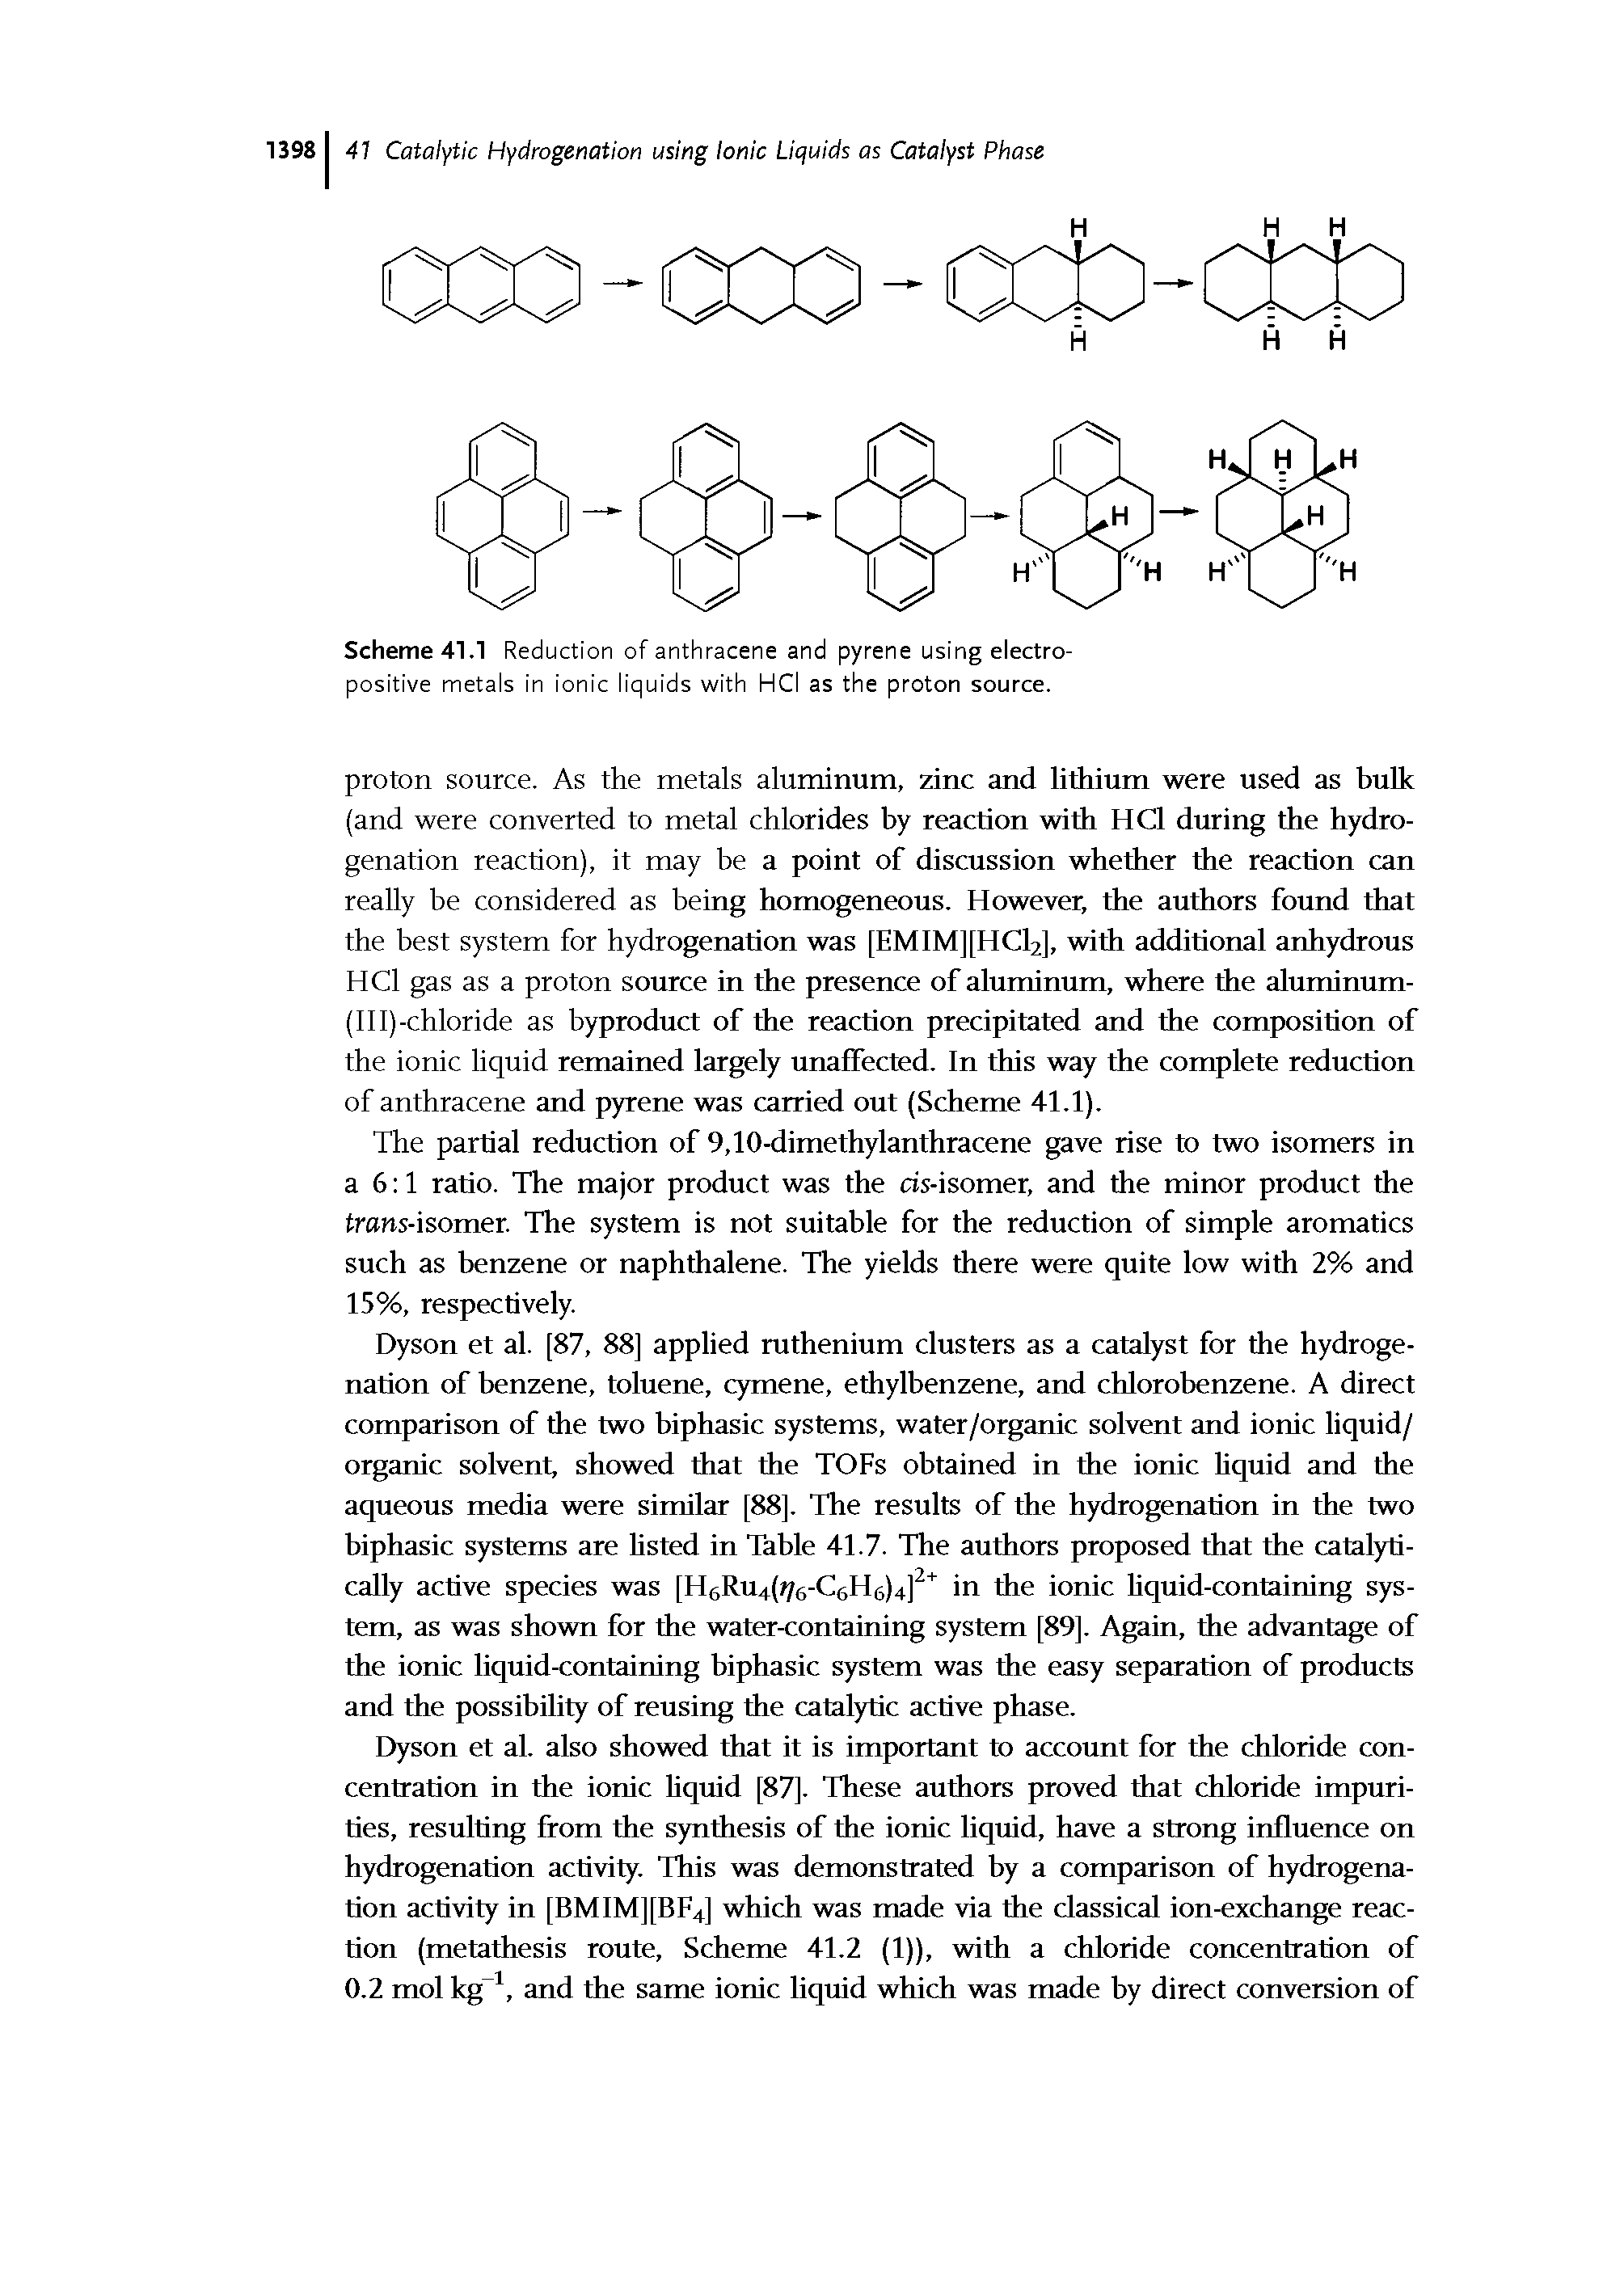 Scheme 41.1 Reduction of anthracene and pyrene using electropositive metals in ionic liquids with HCI as the proton source.